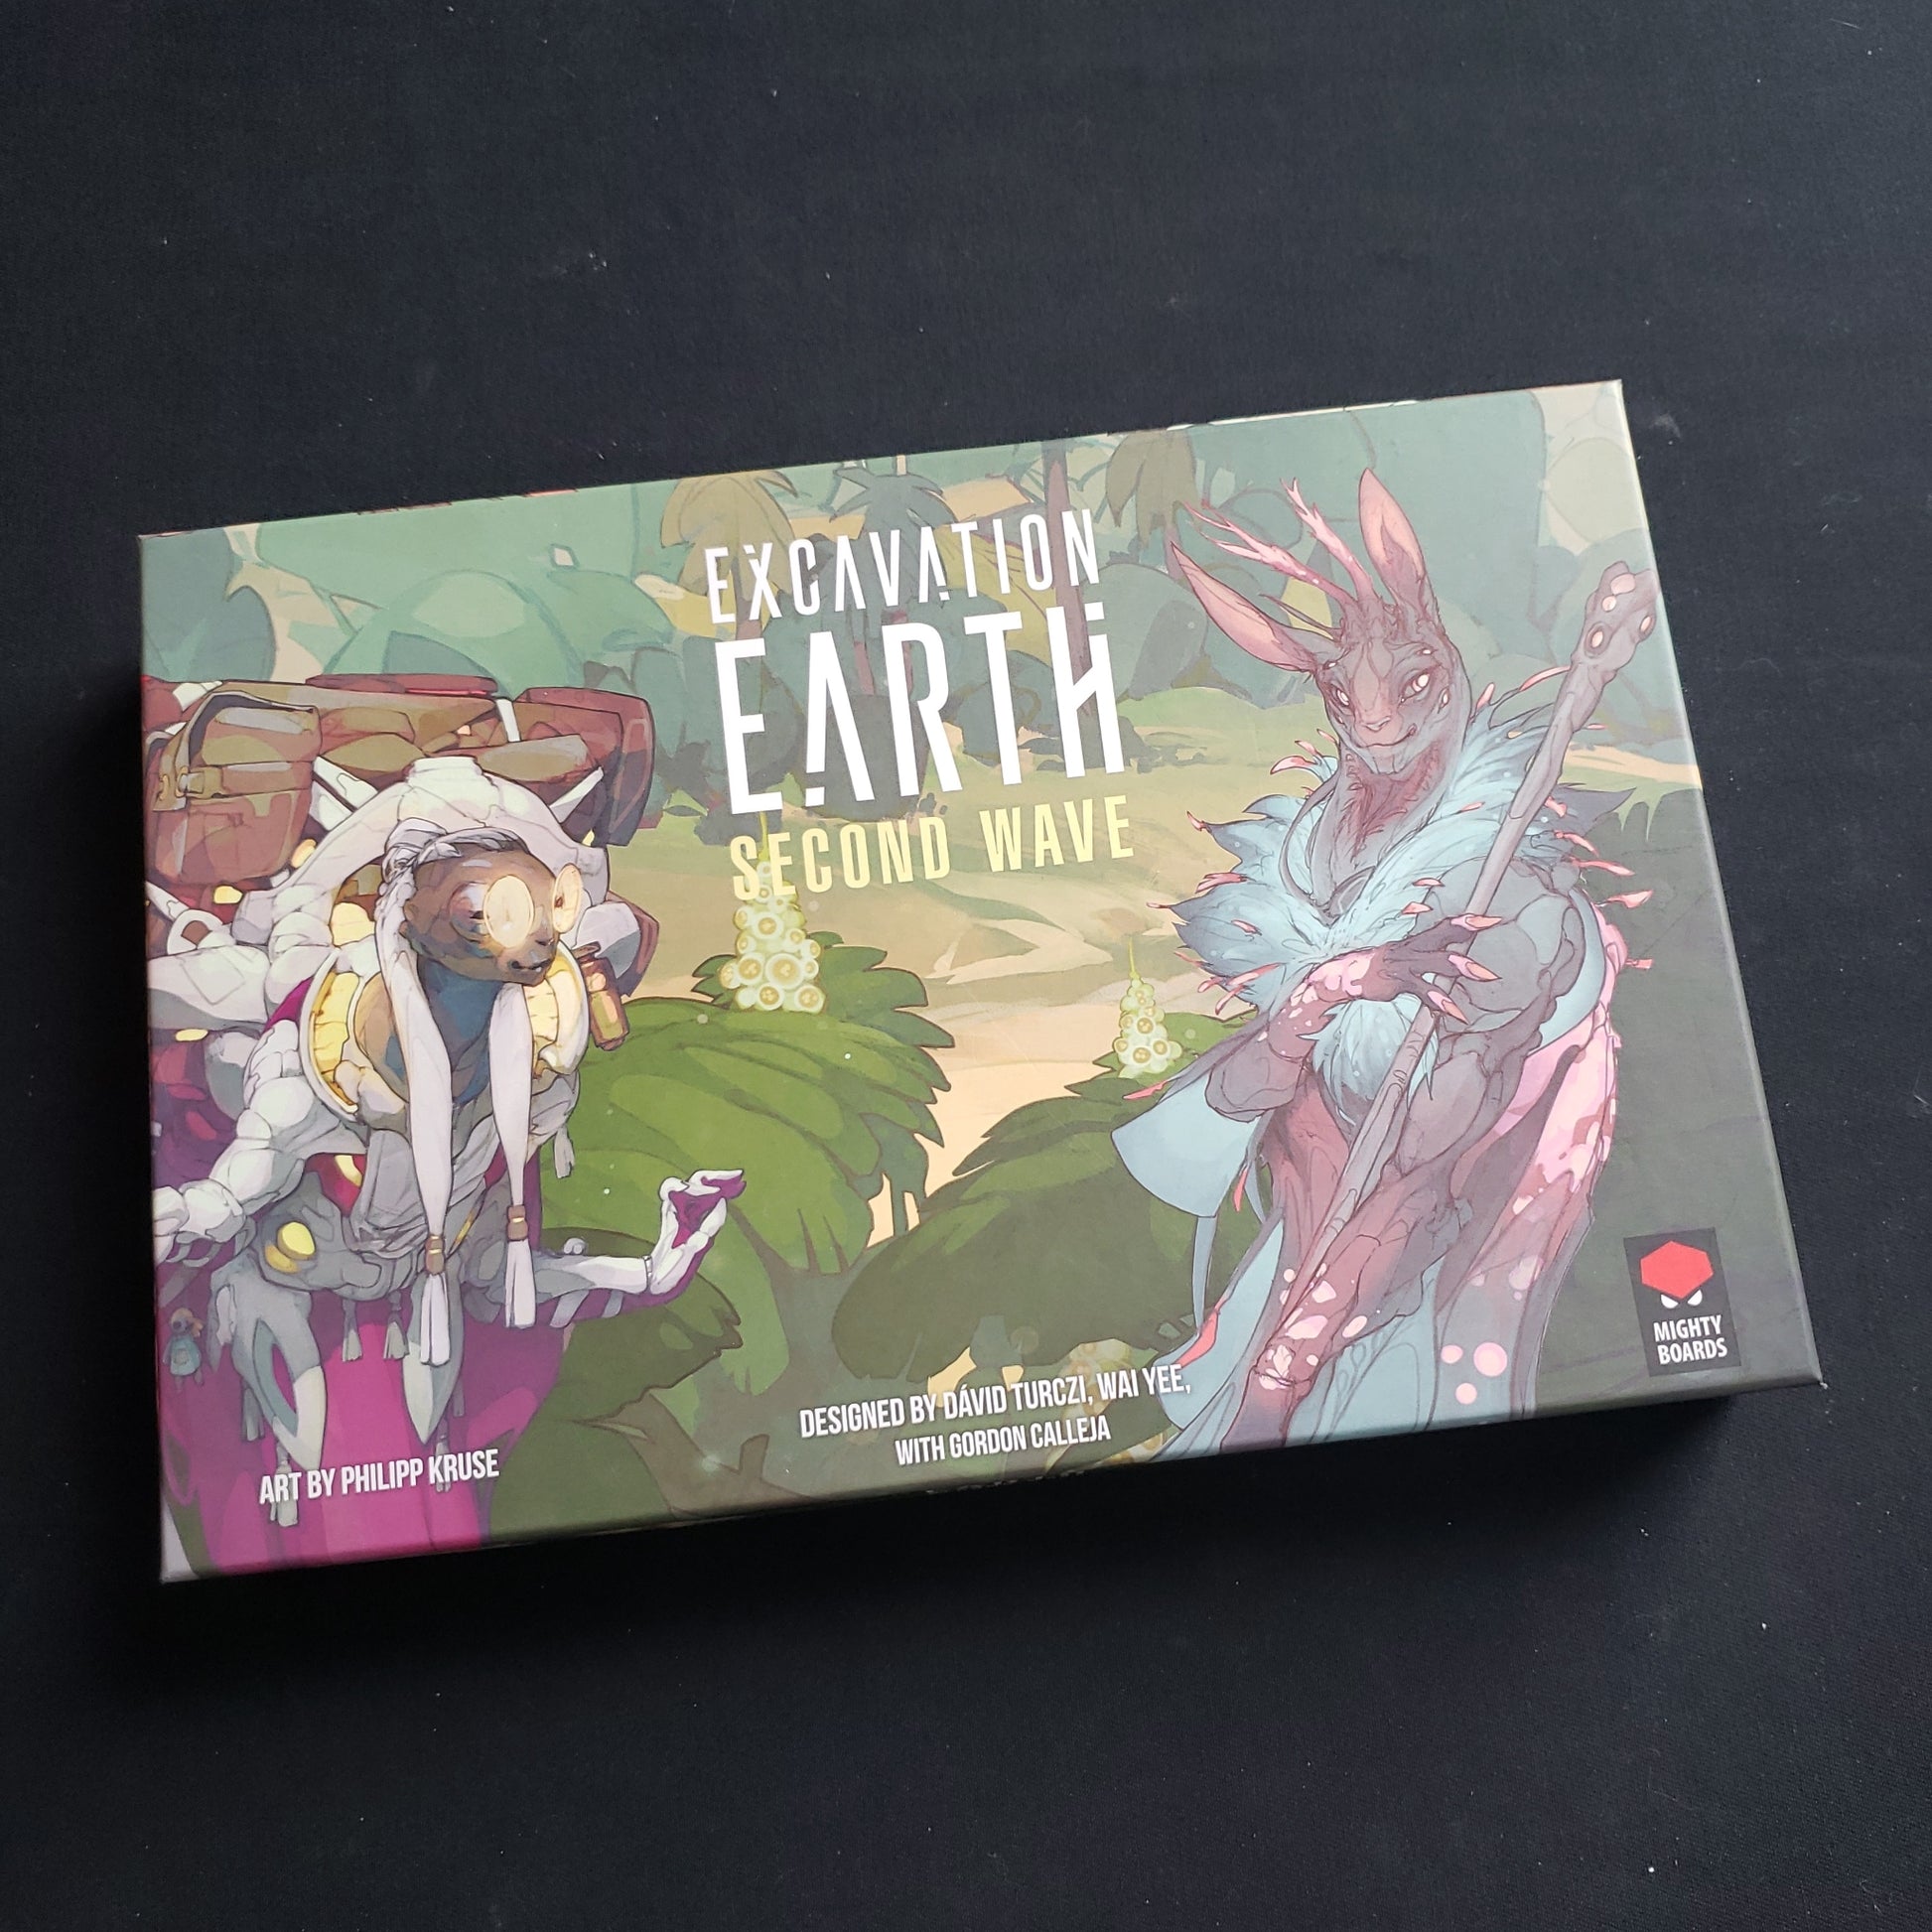 Image shows the front cover of the box of the Second Wave expansion for the board game Excavation Earth